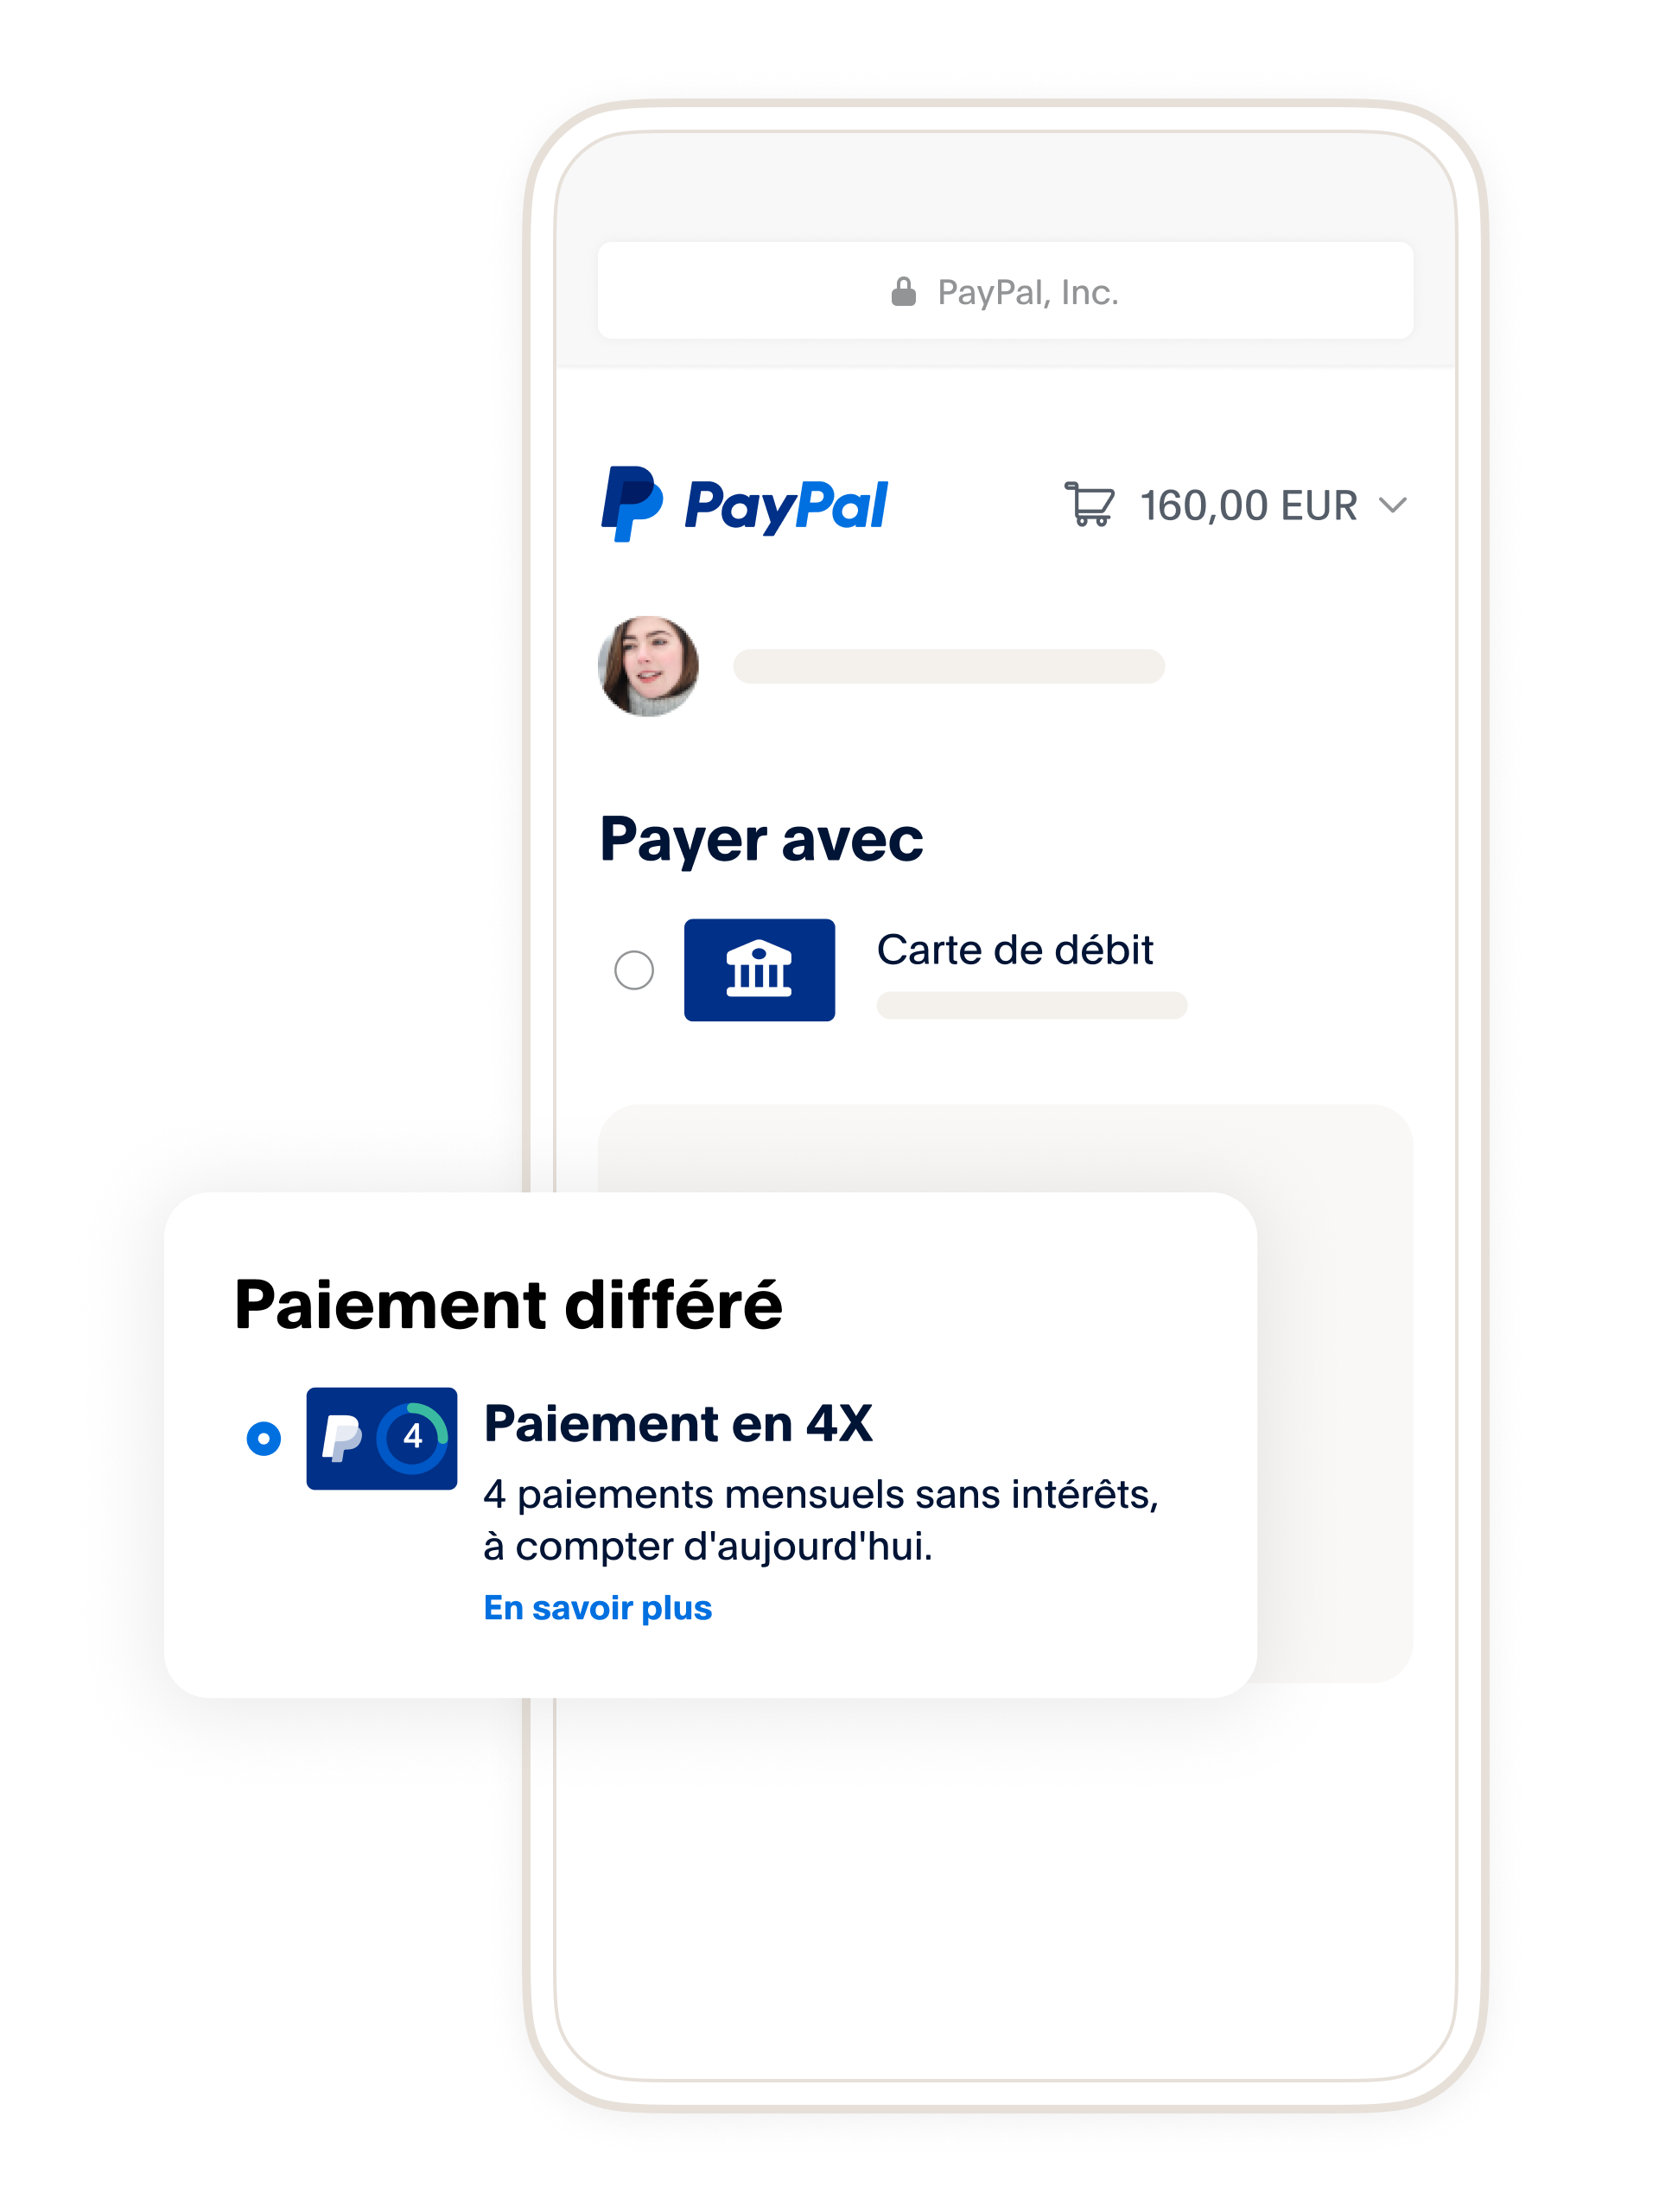 https://www.paypalobjects.com/marketing/web23/fr/ent/pay-later/french/hero_size-mobile-up-v1.png